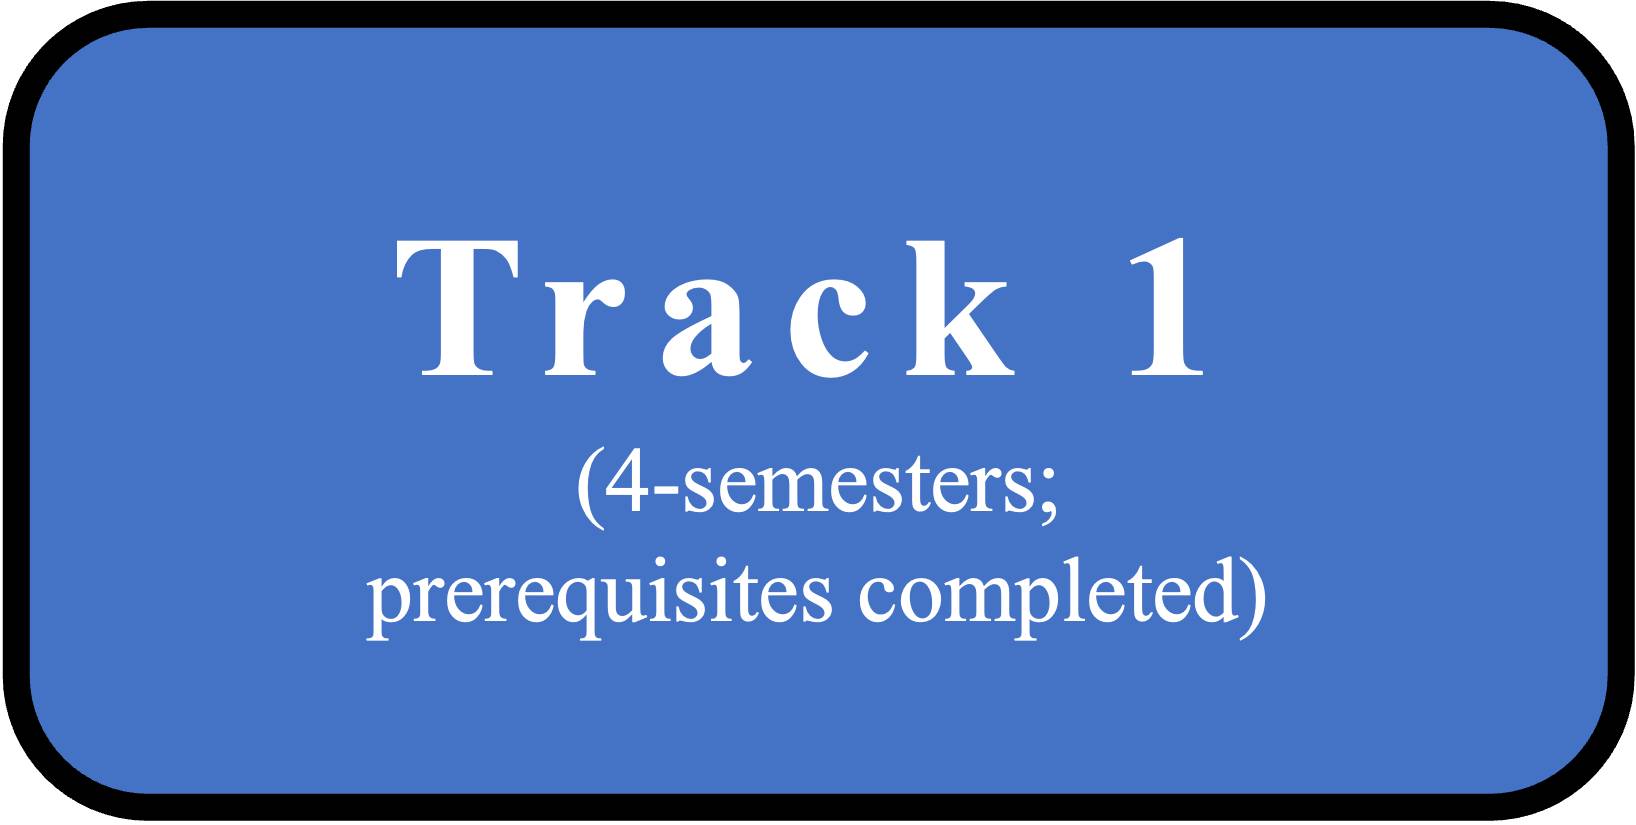 Track 1 - 4-semester program for those with prerequisites completed